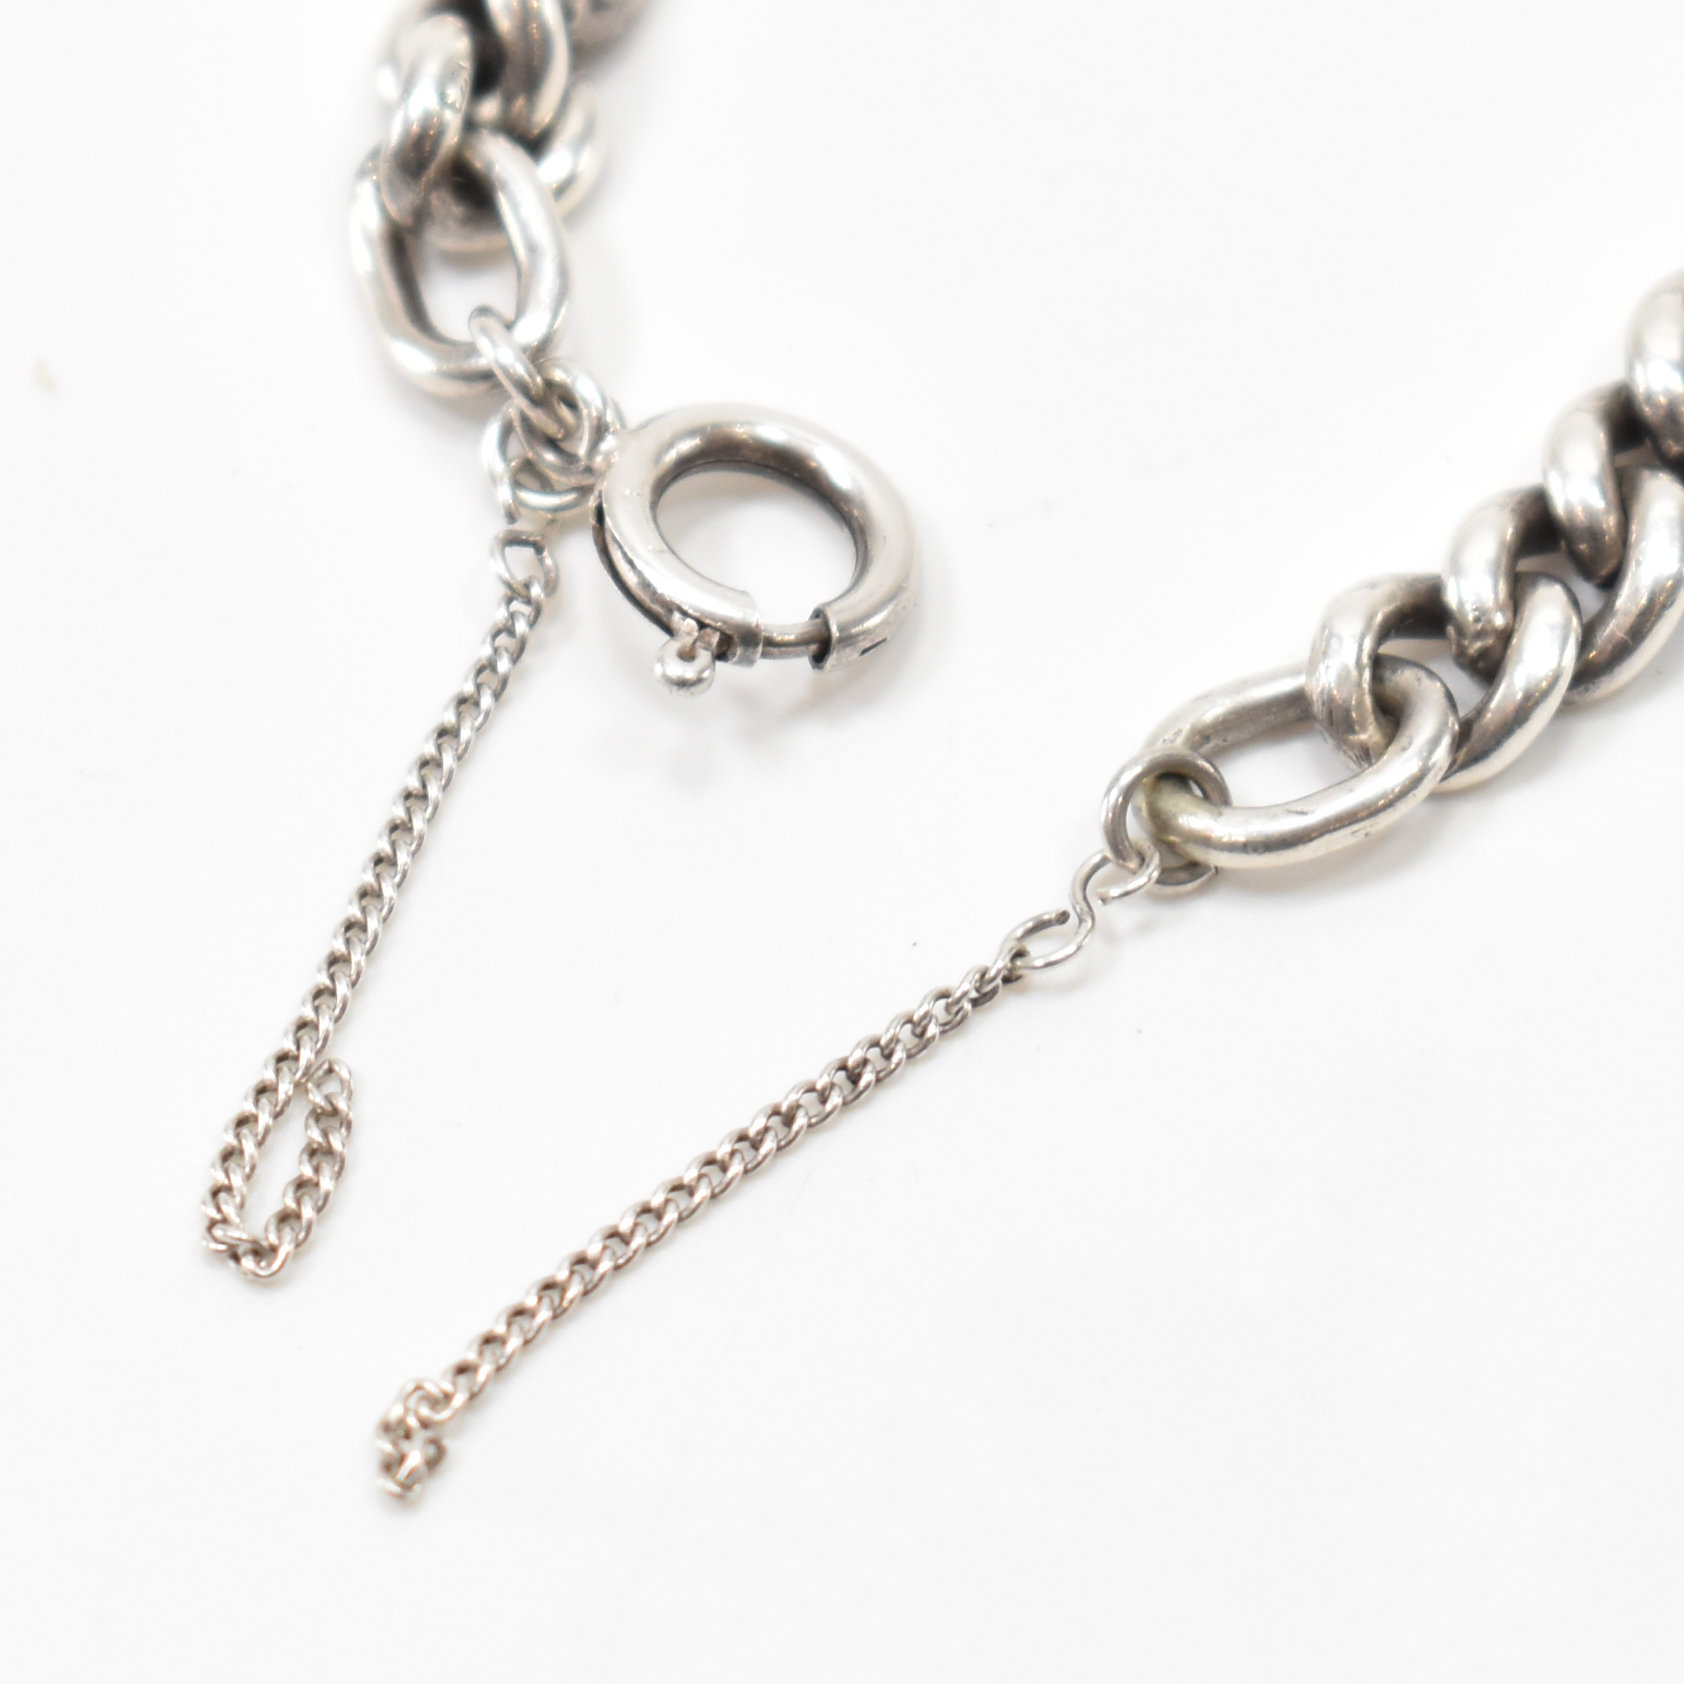 PAIR OF SILVER CHAIN BRACELETS - Image 5 of 5